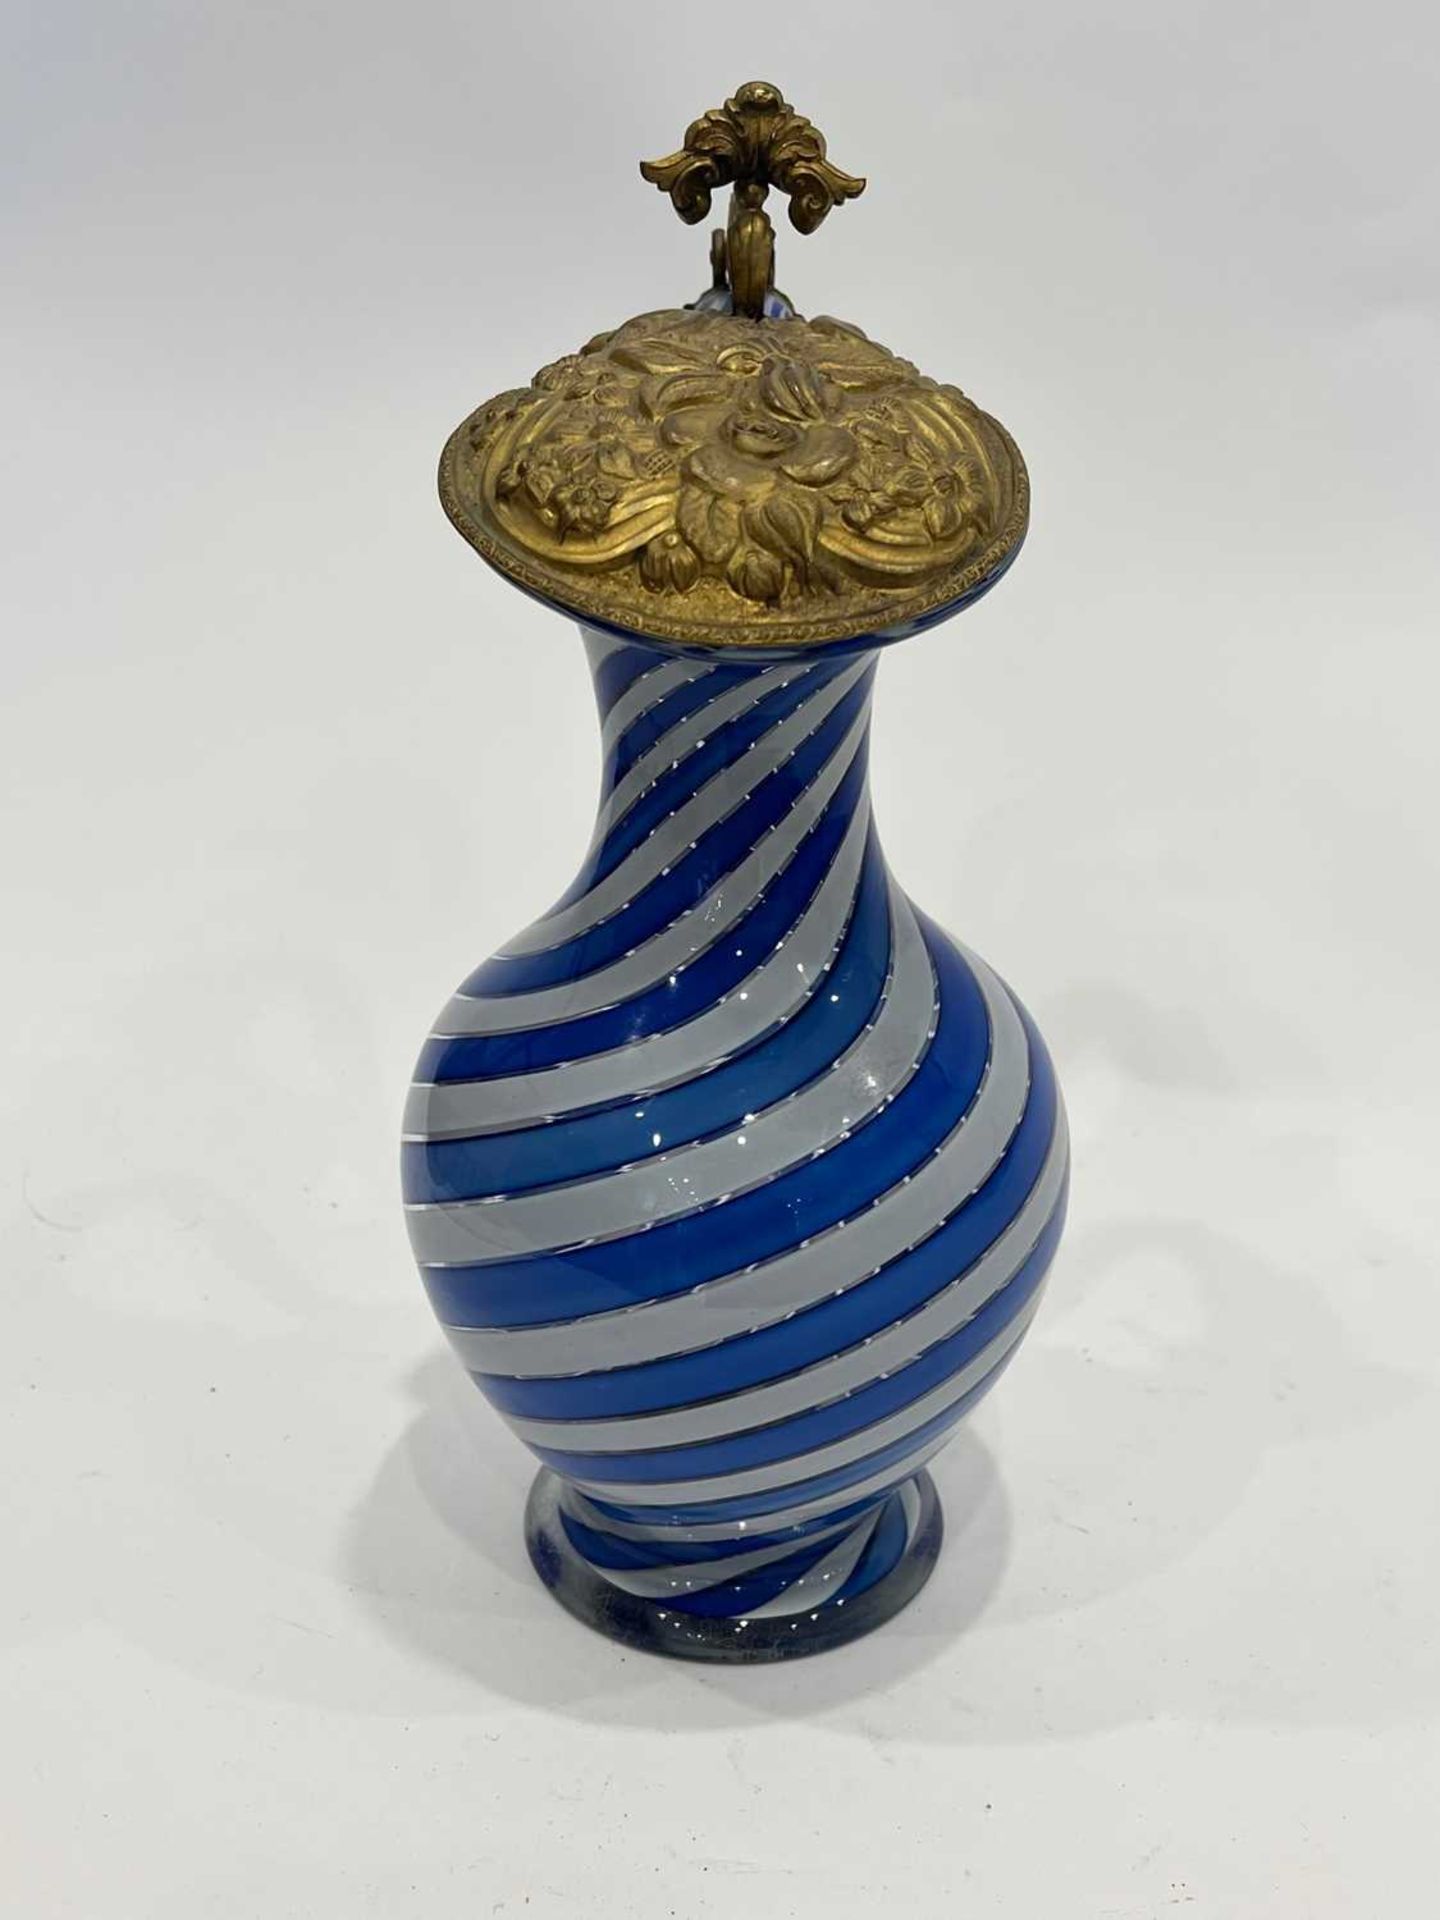 FOR THE PERSIAN / OTTOMAN MARKET : A LATE 19TH CENTURY FRENCH GLASS EWER - Image 3 of 12